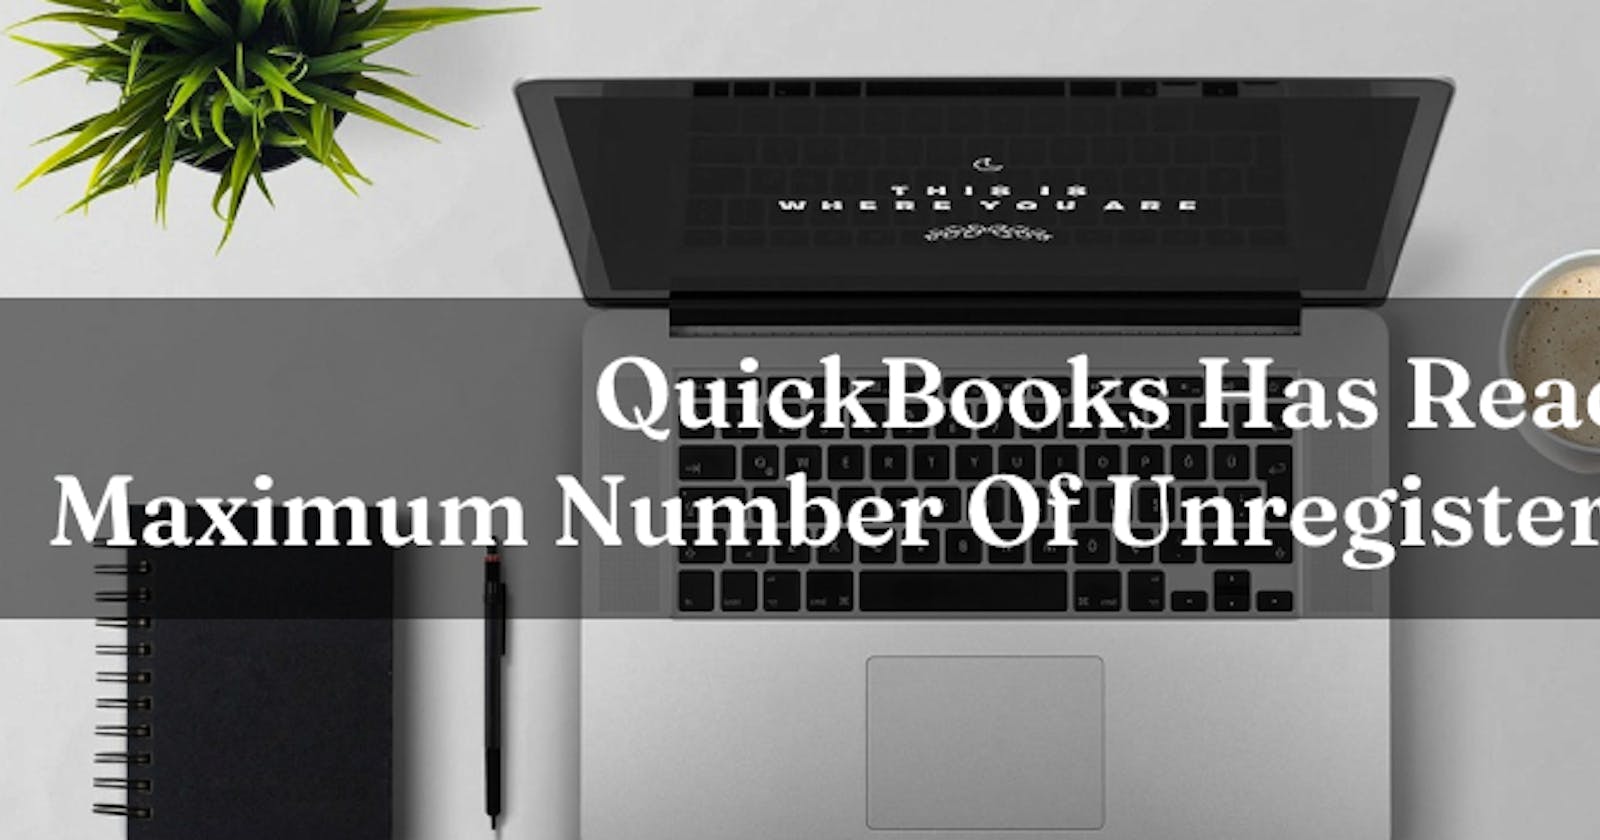 QuickBooks Has Reached The Maximum Number Of Unregistered Users